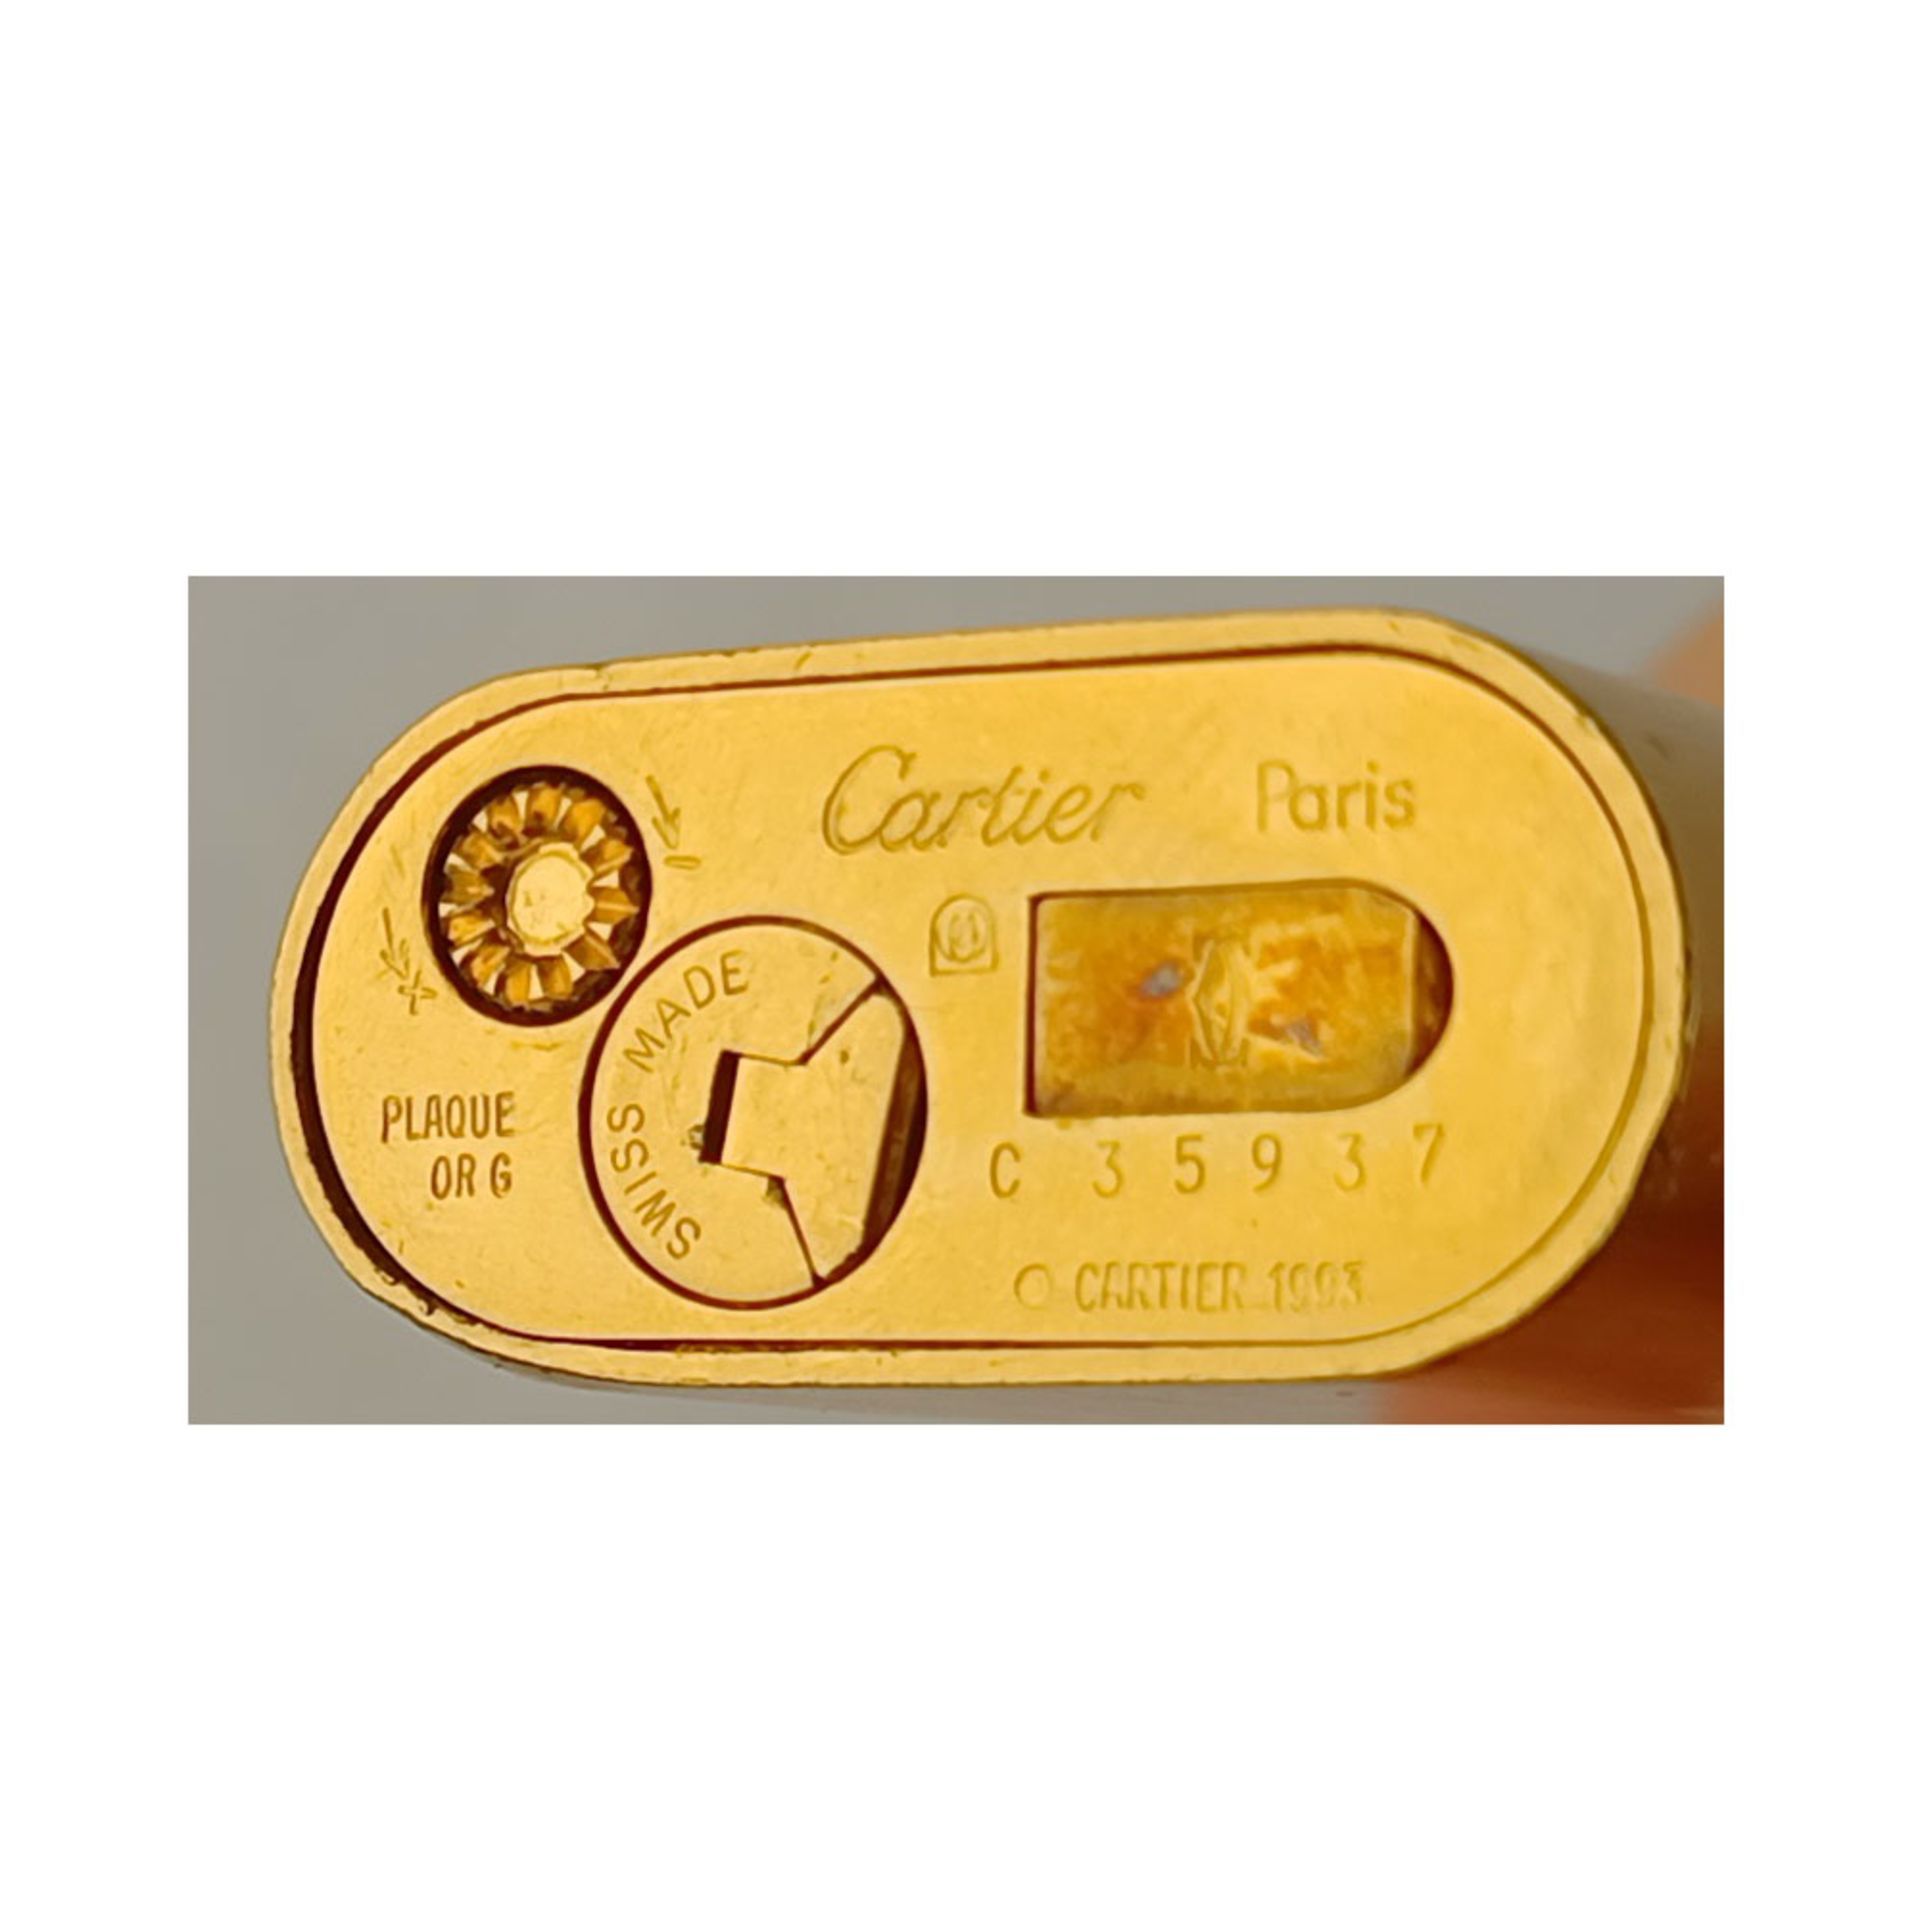 Cartier gold plated lighter 1993 - Image 4 of 6